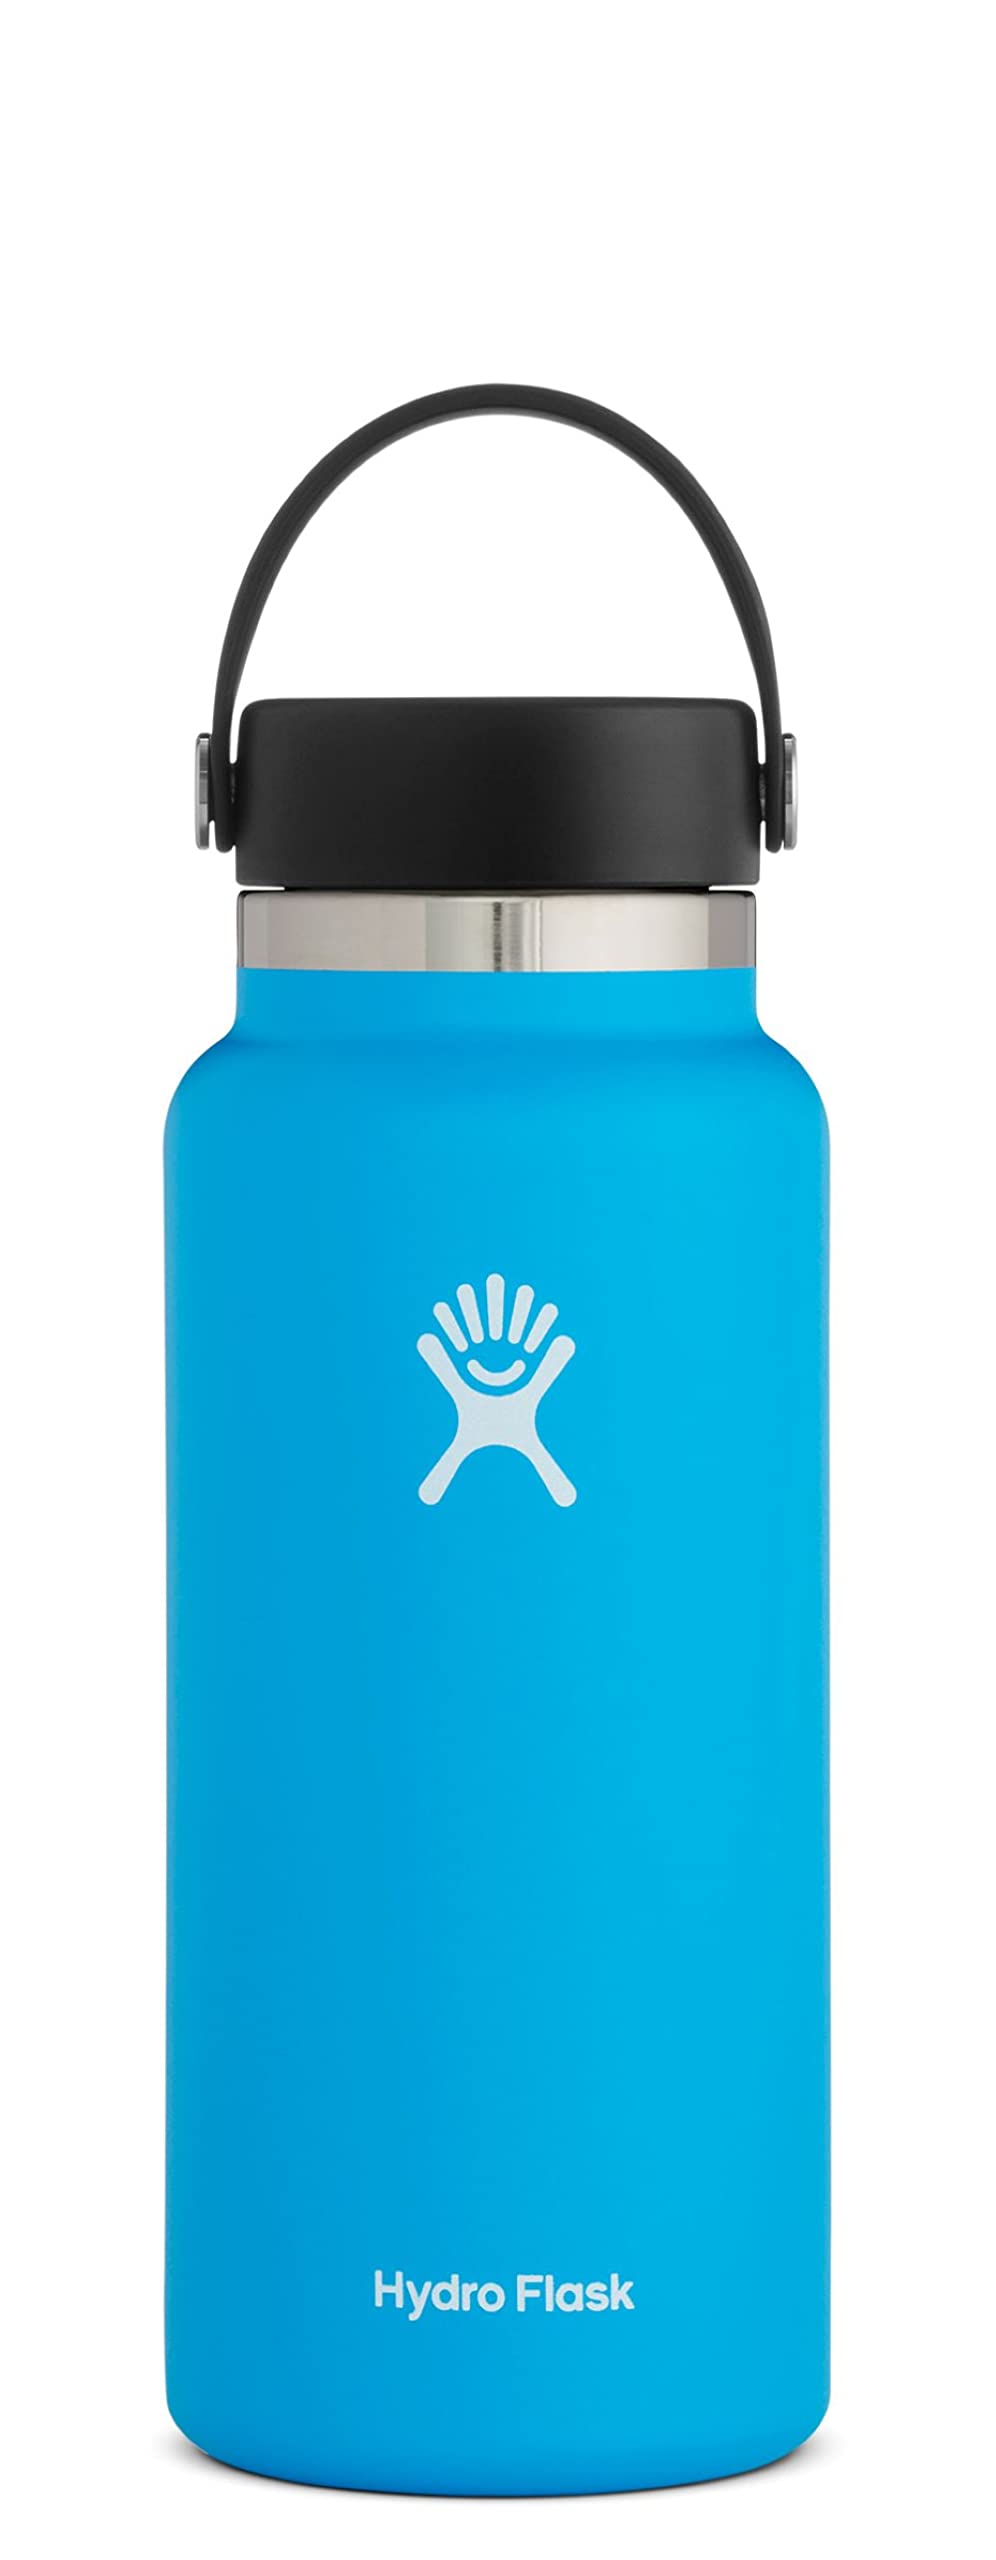 Hydro Flask 32 oz Vacuum Insulated Stainless Steel Water Bottle Flask - Flex Cap with Strap  - Wide Mouth - Pacific